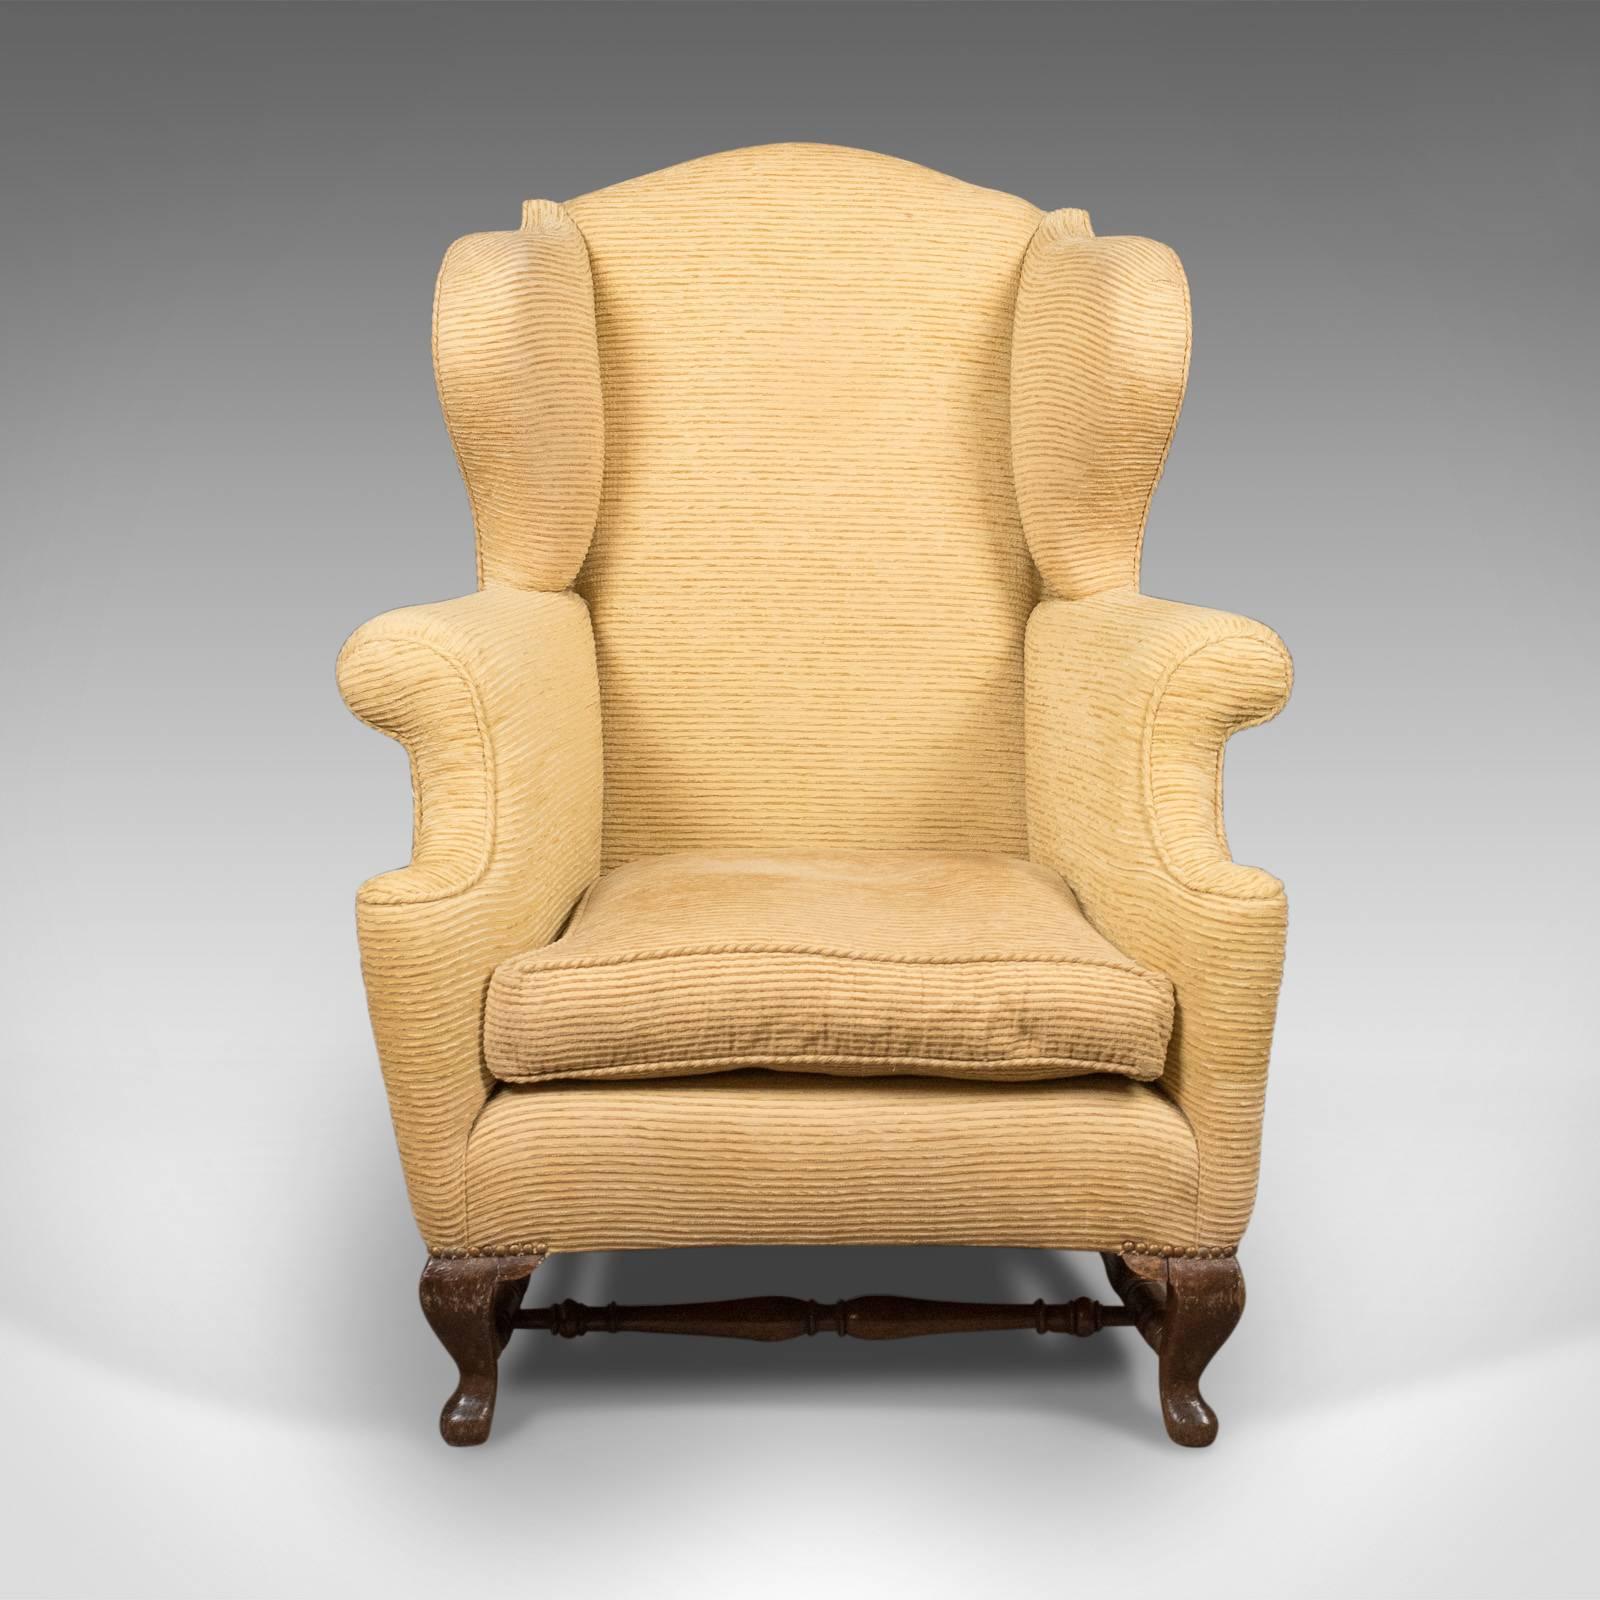 This is a late Victorian wing back armchair dating to the turn of the century, circa 1900.

A large comfortable seat with loose feather filled cushion
Well sprung and professionally upholstered
Finished in a pale mustard, corded cloth ready to